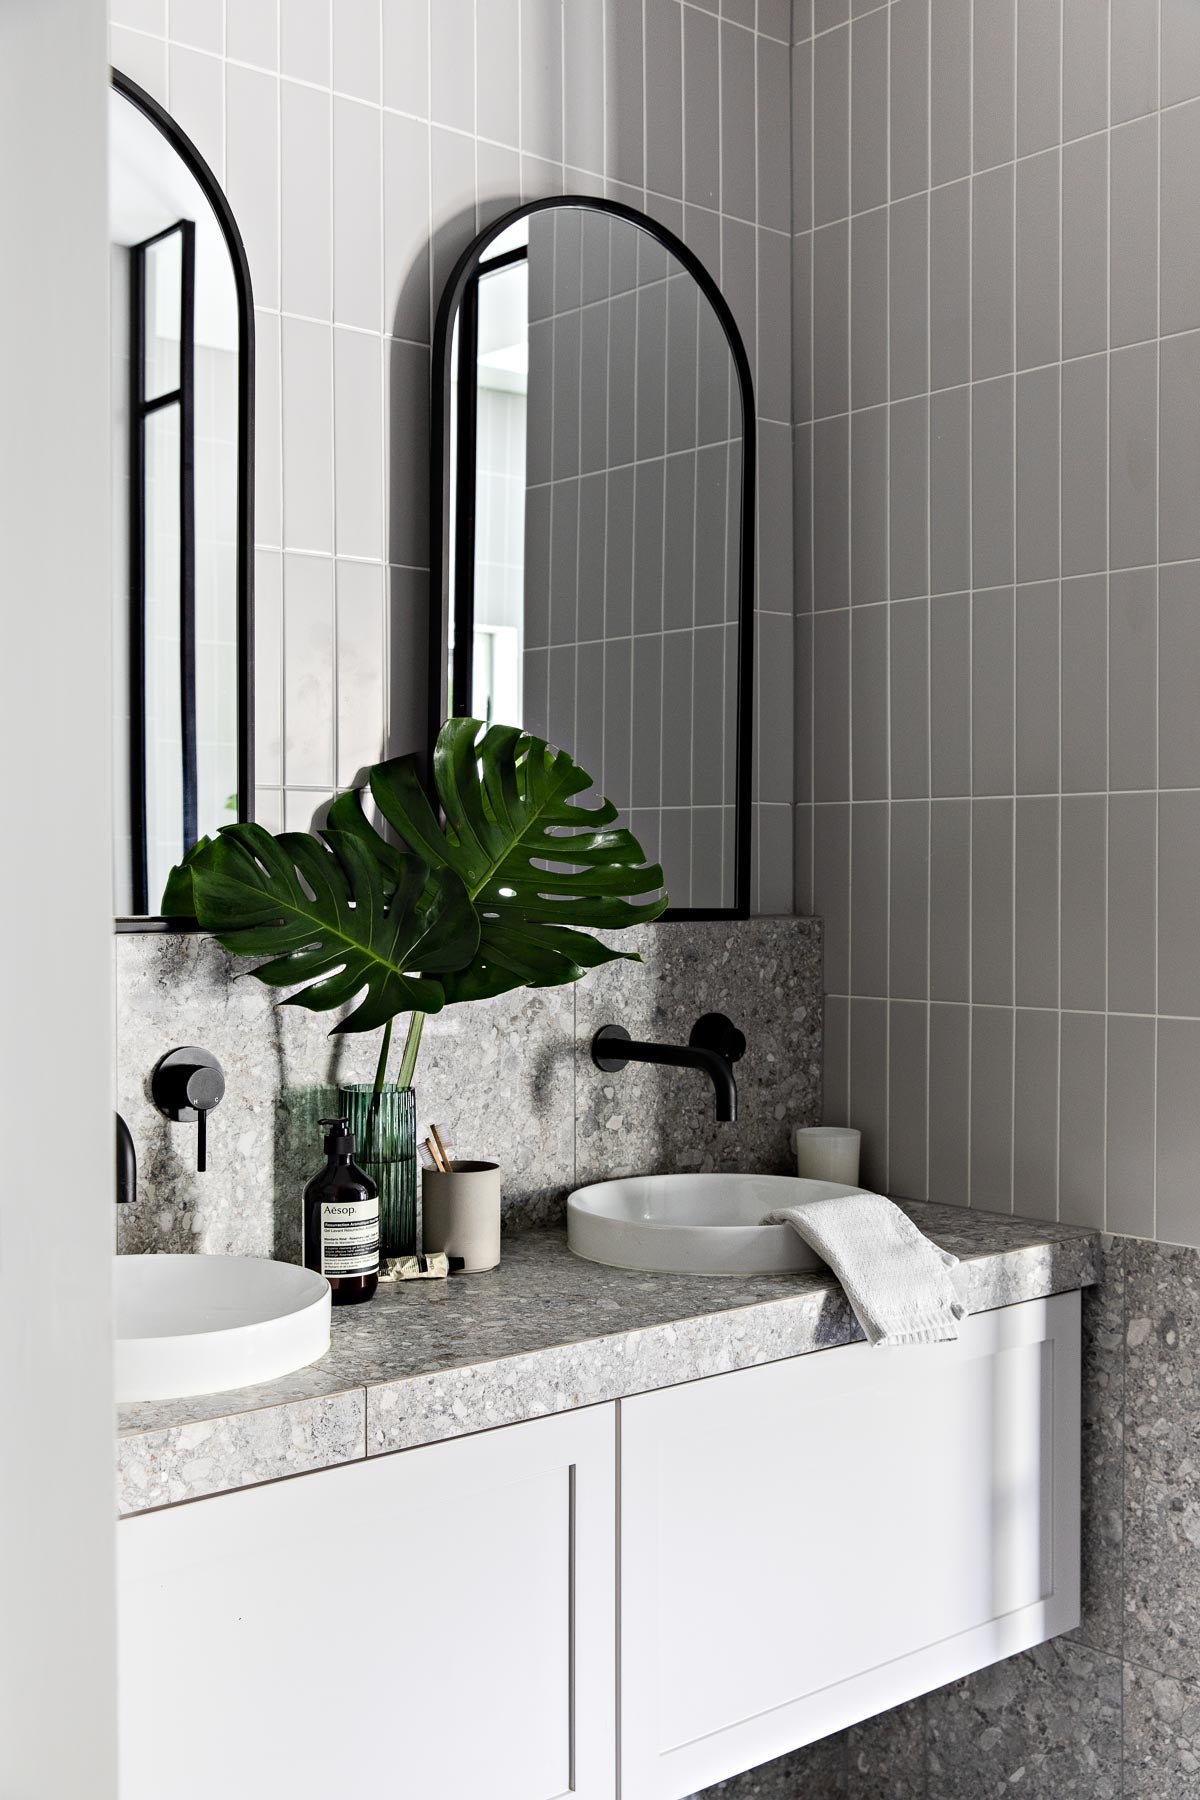 Bathroom styling tips for better sale results